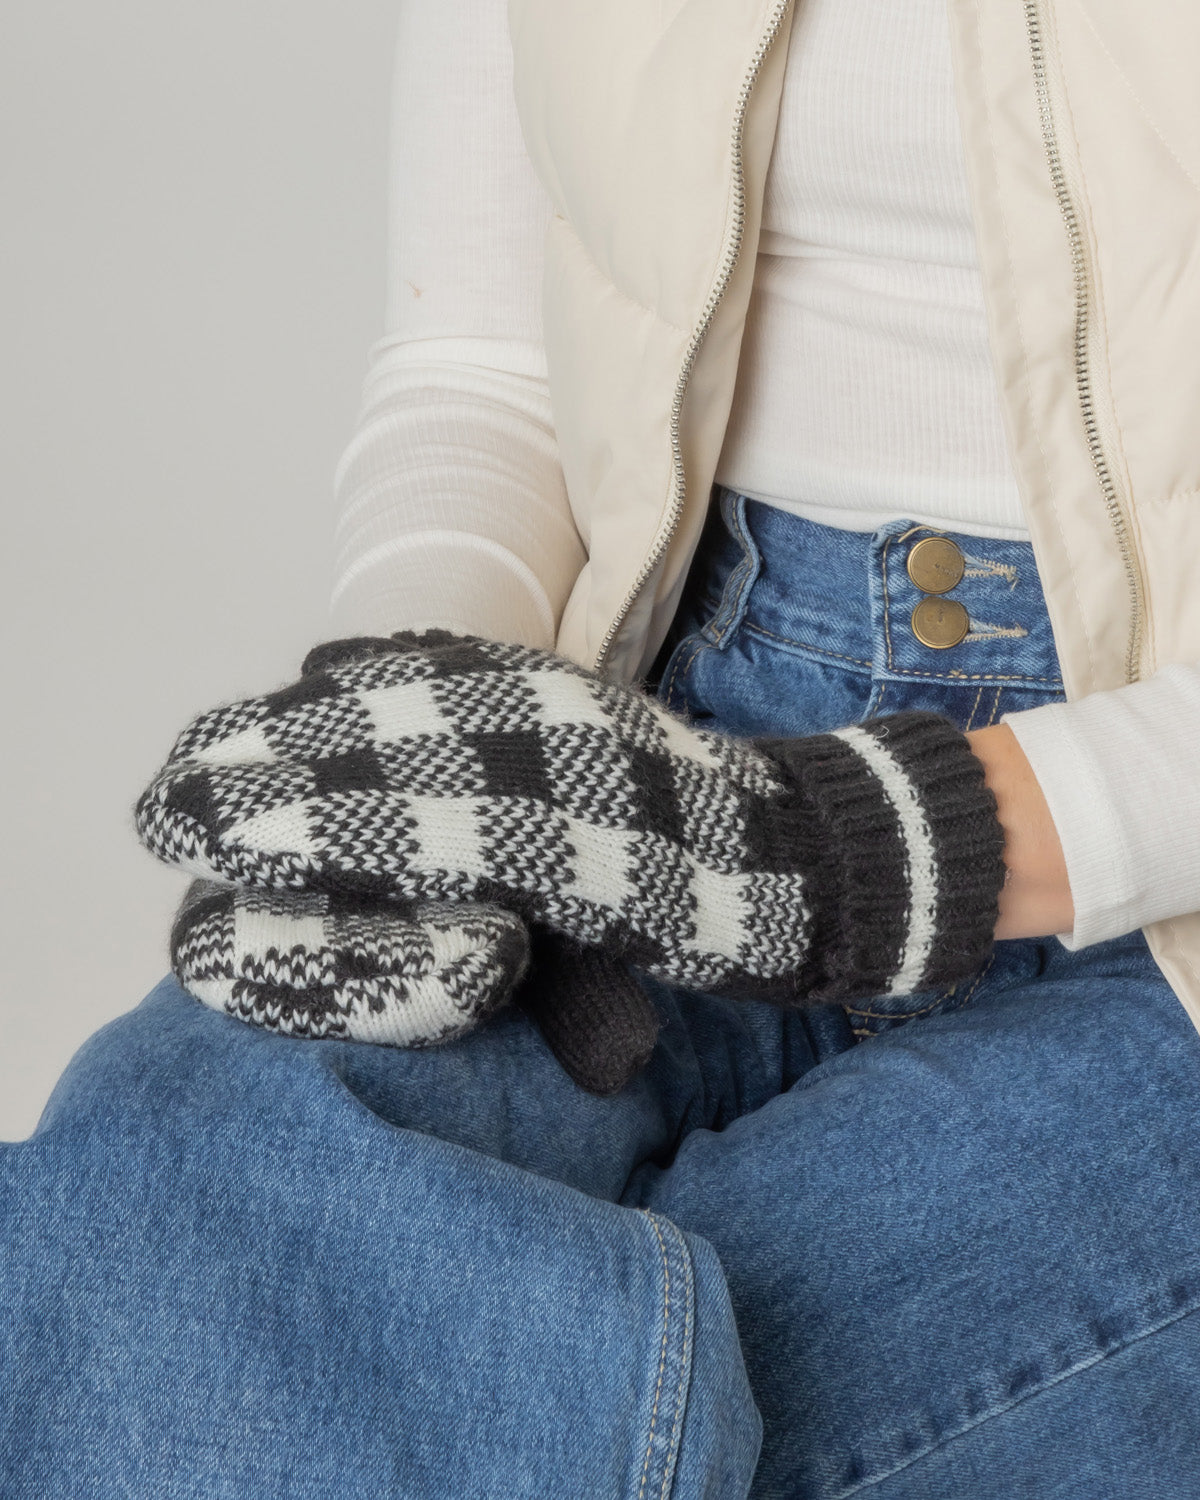 Shop for KW Fashion Buffalo Mittens at doeverythinginloveny.com wholesale fashion accessories